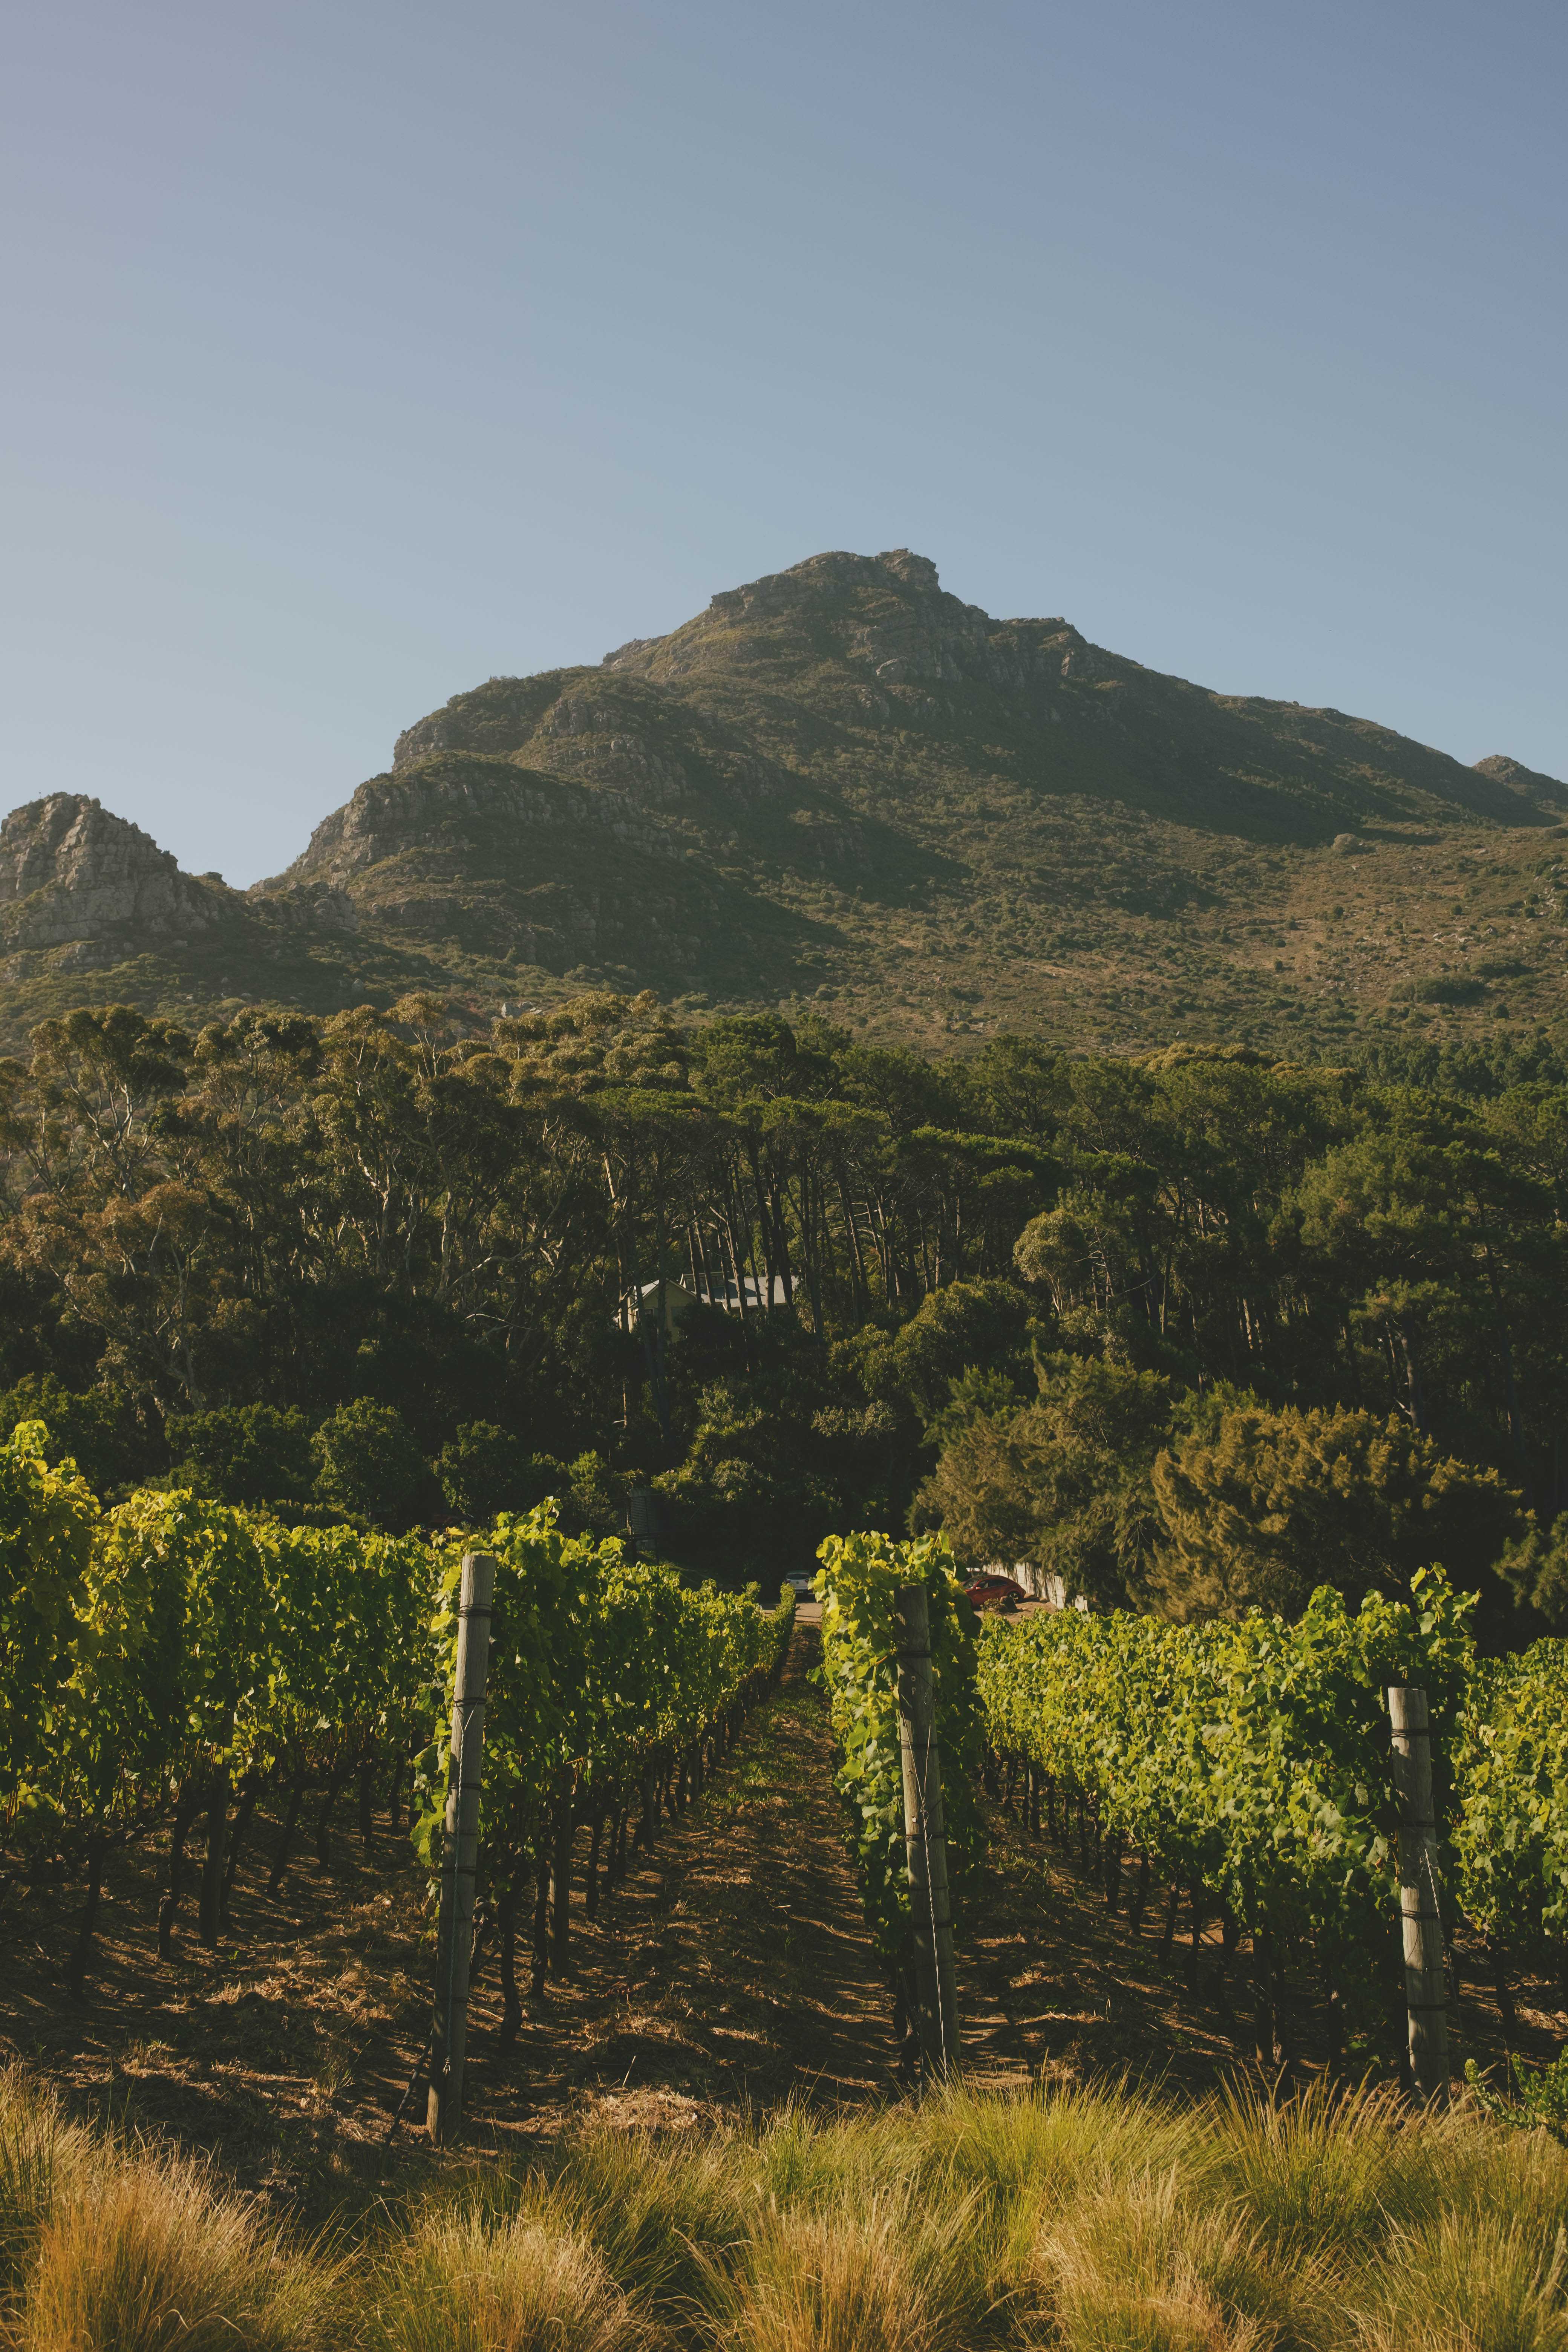 Rows of grapevines with trees and a mountain in the background.